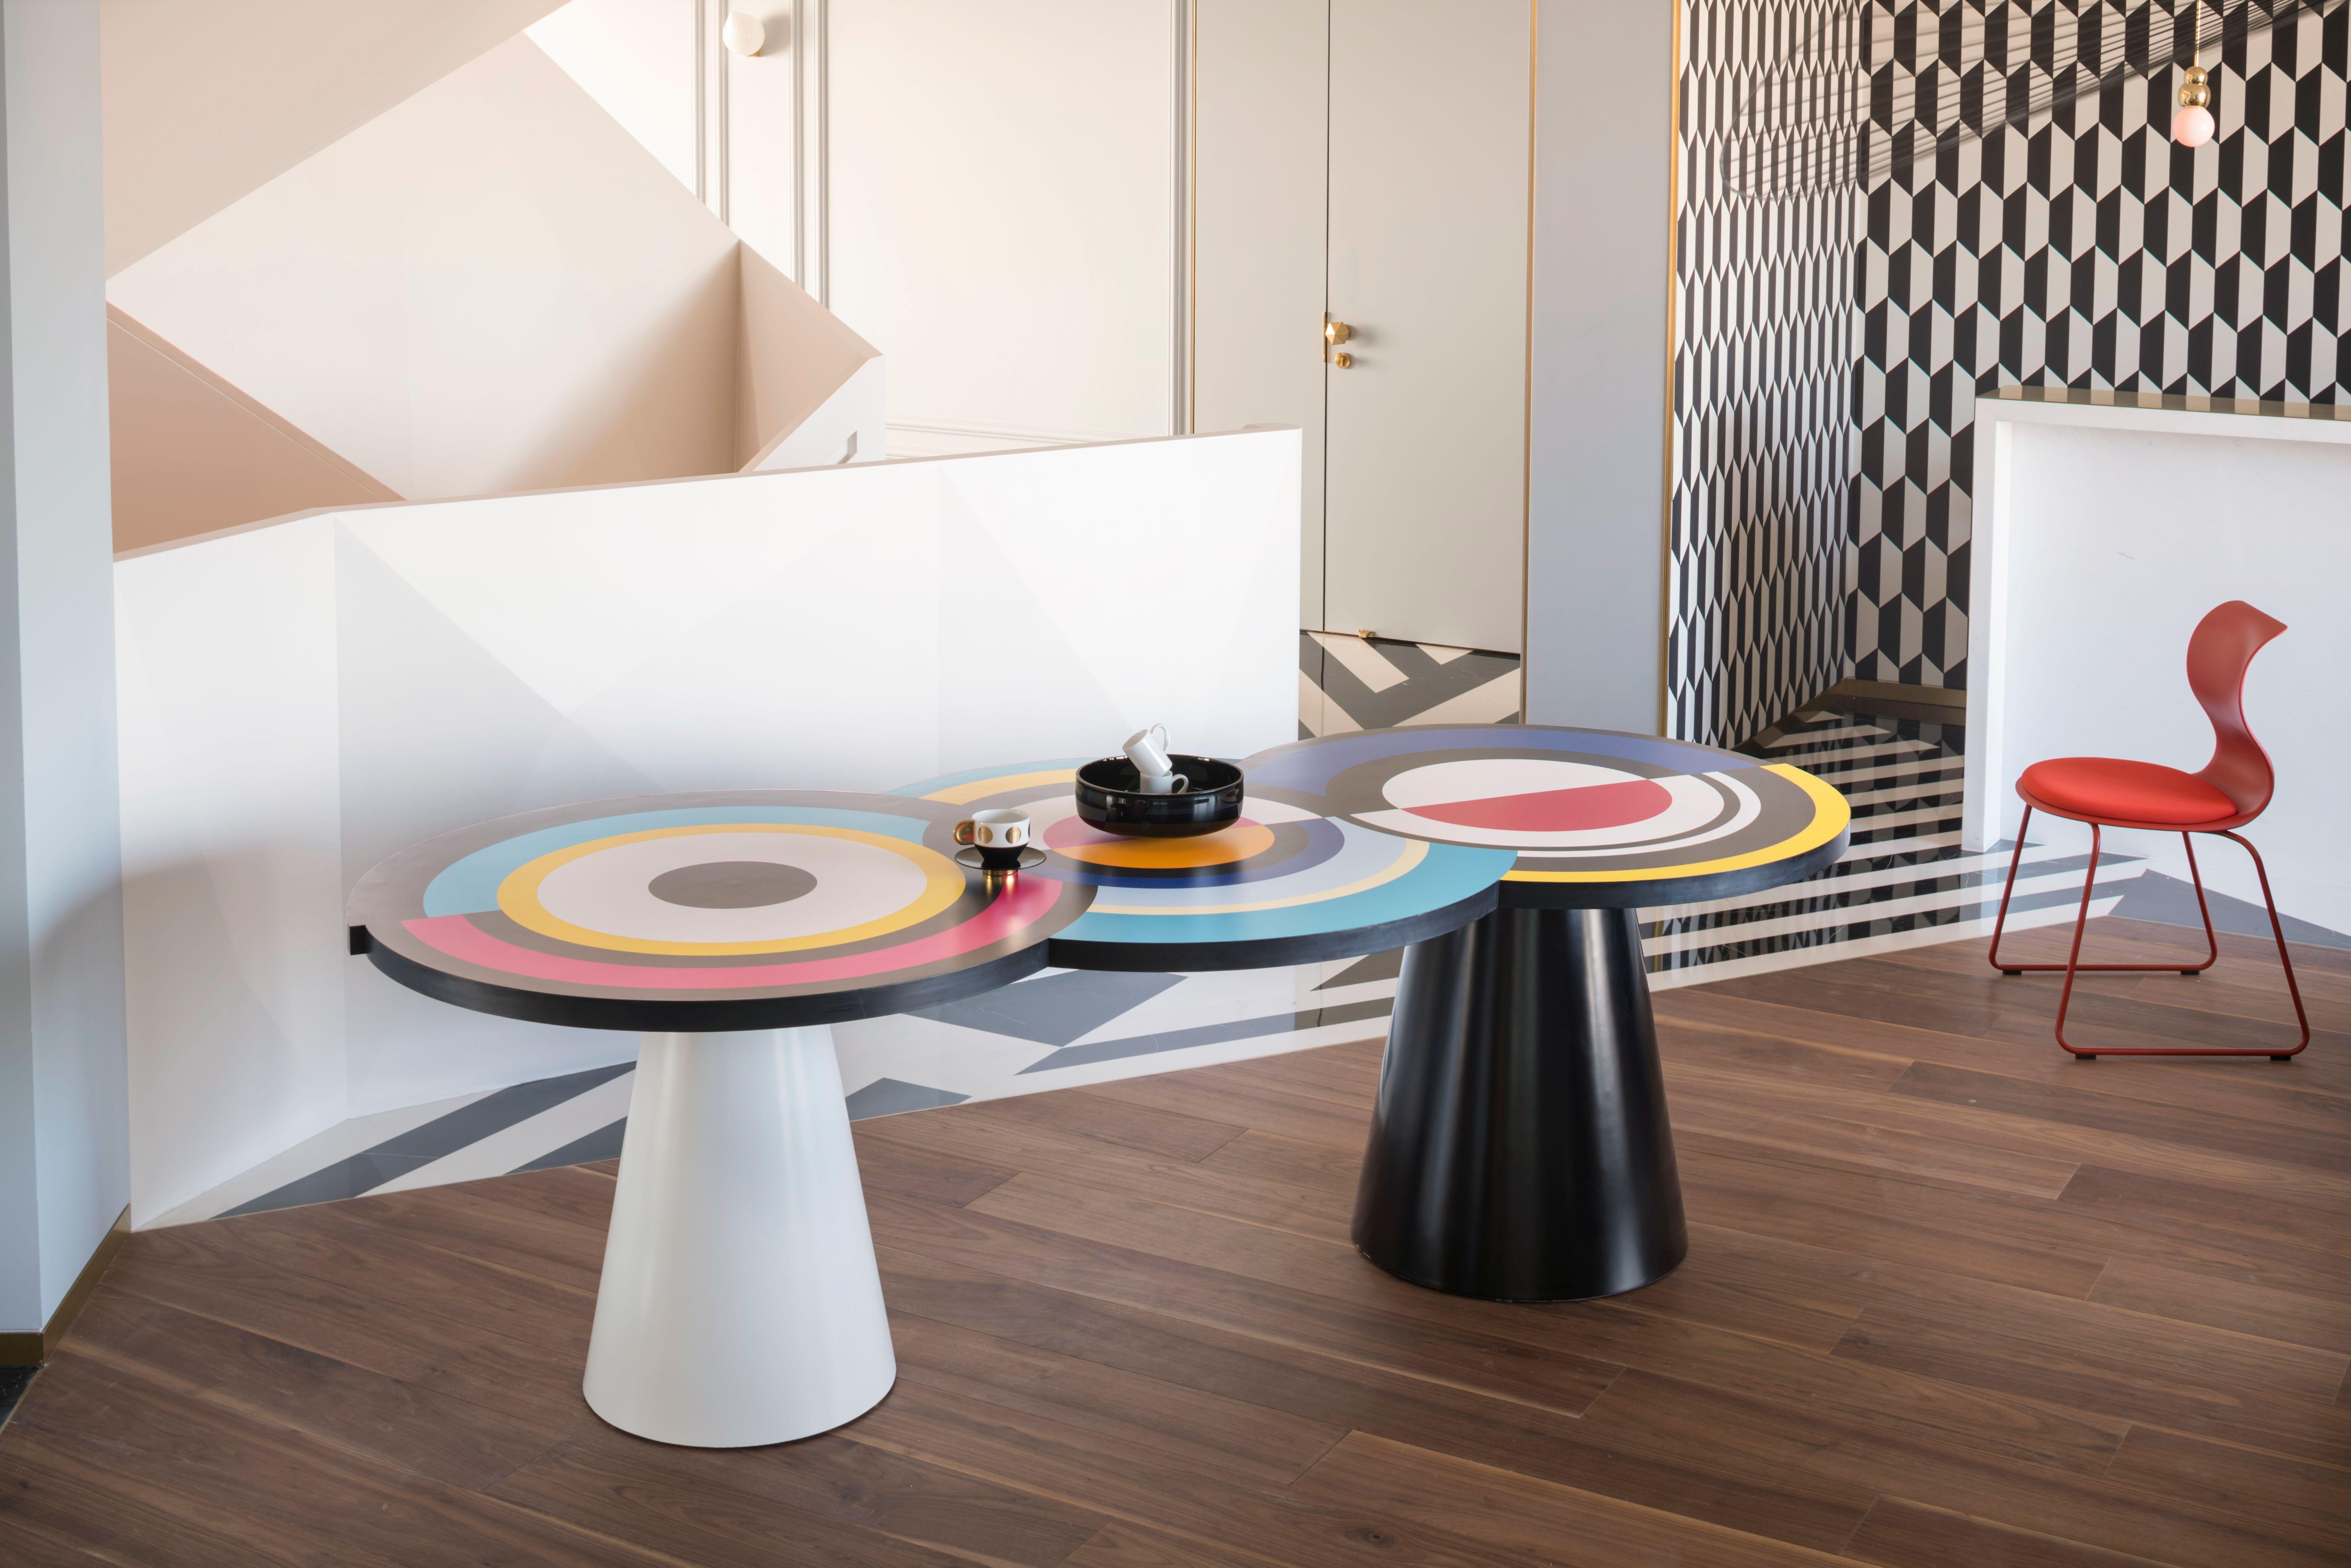 Homage to Delaunay dining table by Thomas Dariel, Maison Dada
Measures: W236 x D108 x H74 cm
Structure in MDF • Base painted in matte color finish
Printed laminate top
Sonia et Cætera pays homage to the famous French painter Sonia Delaunay,